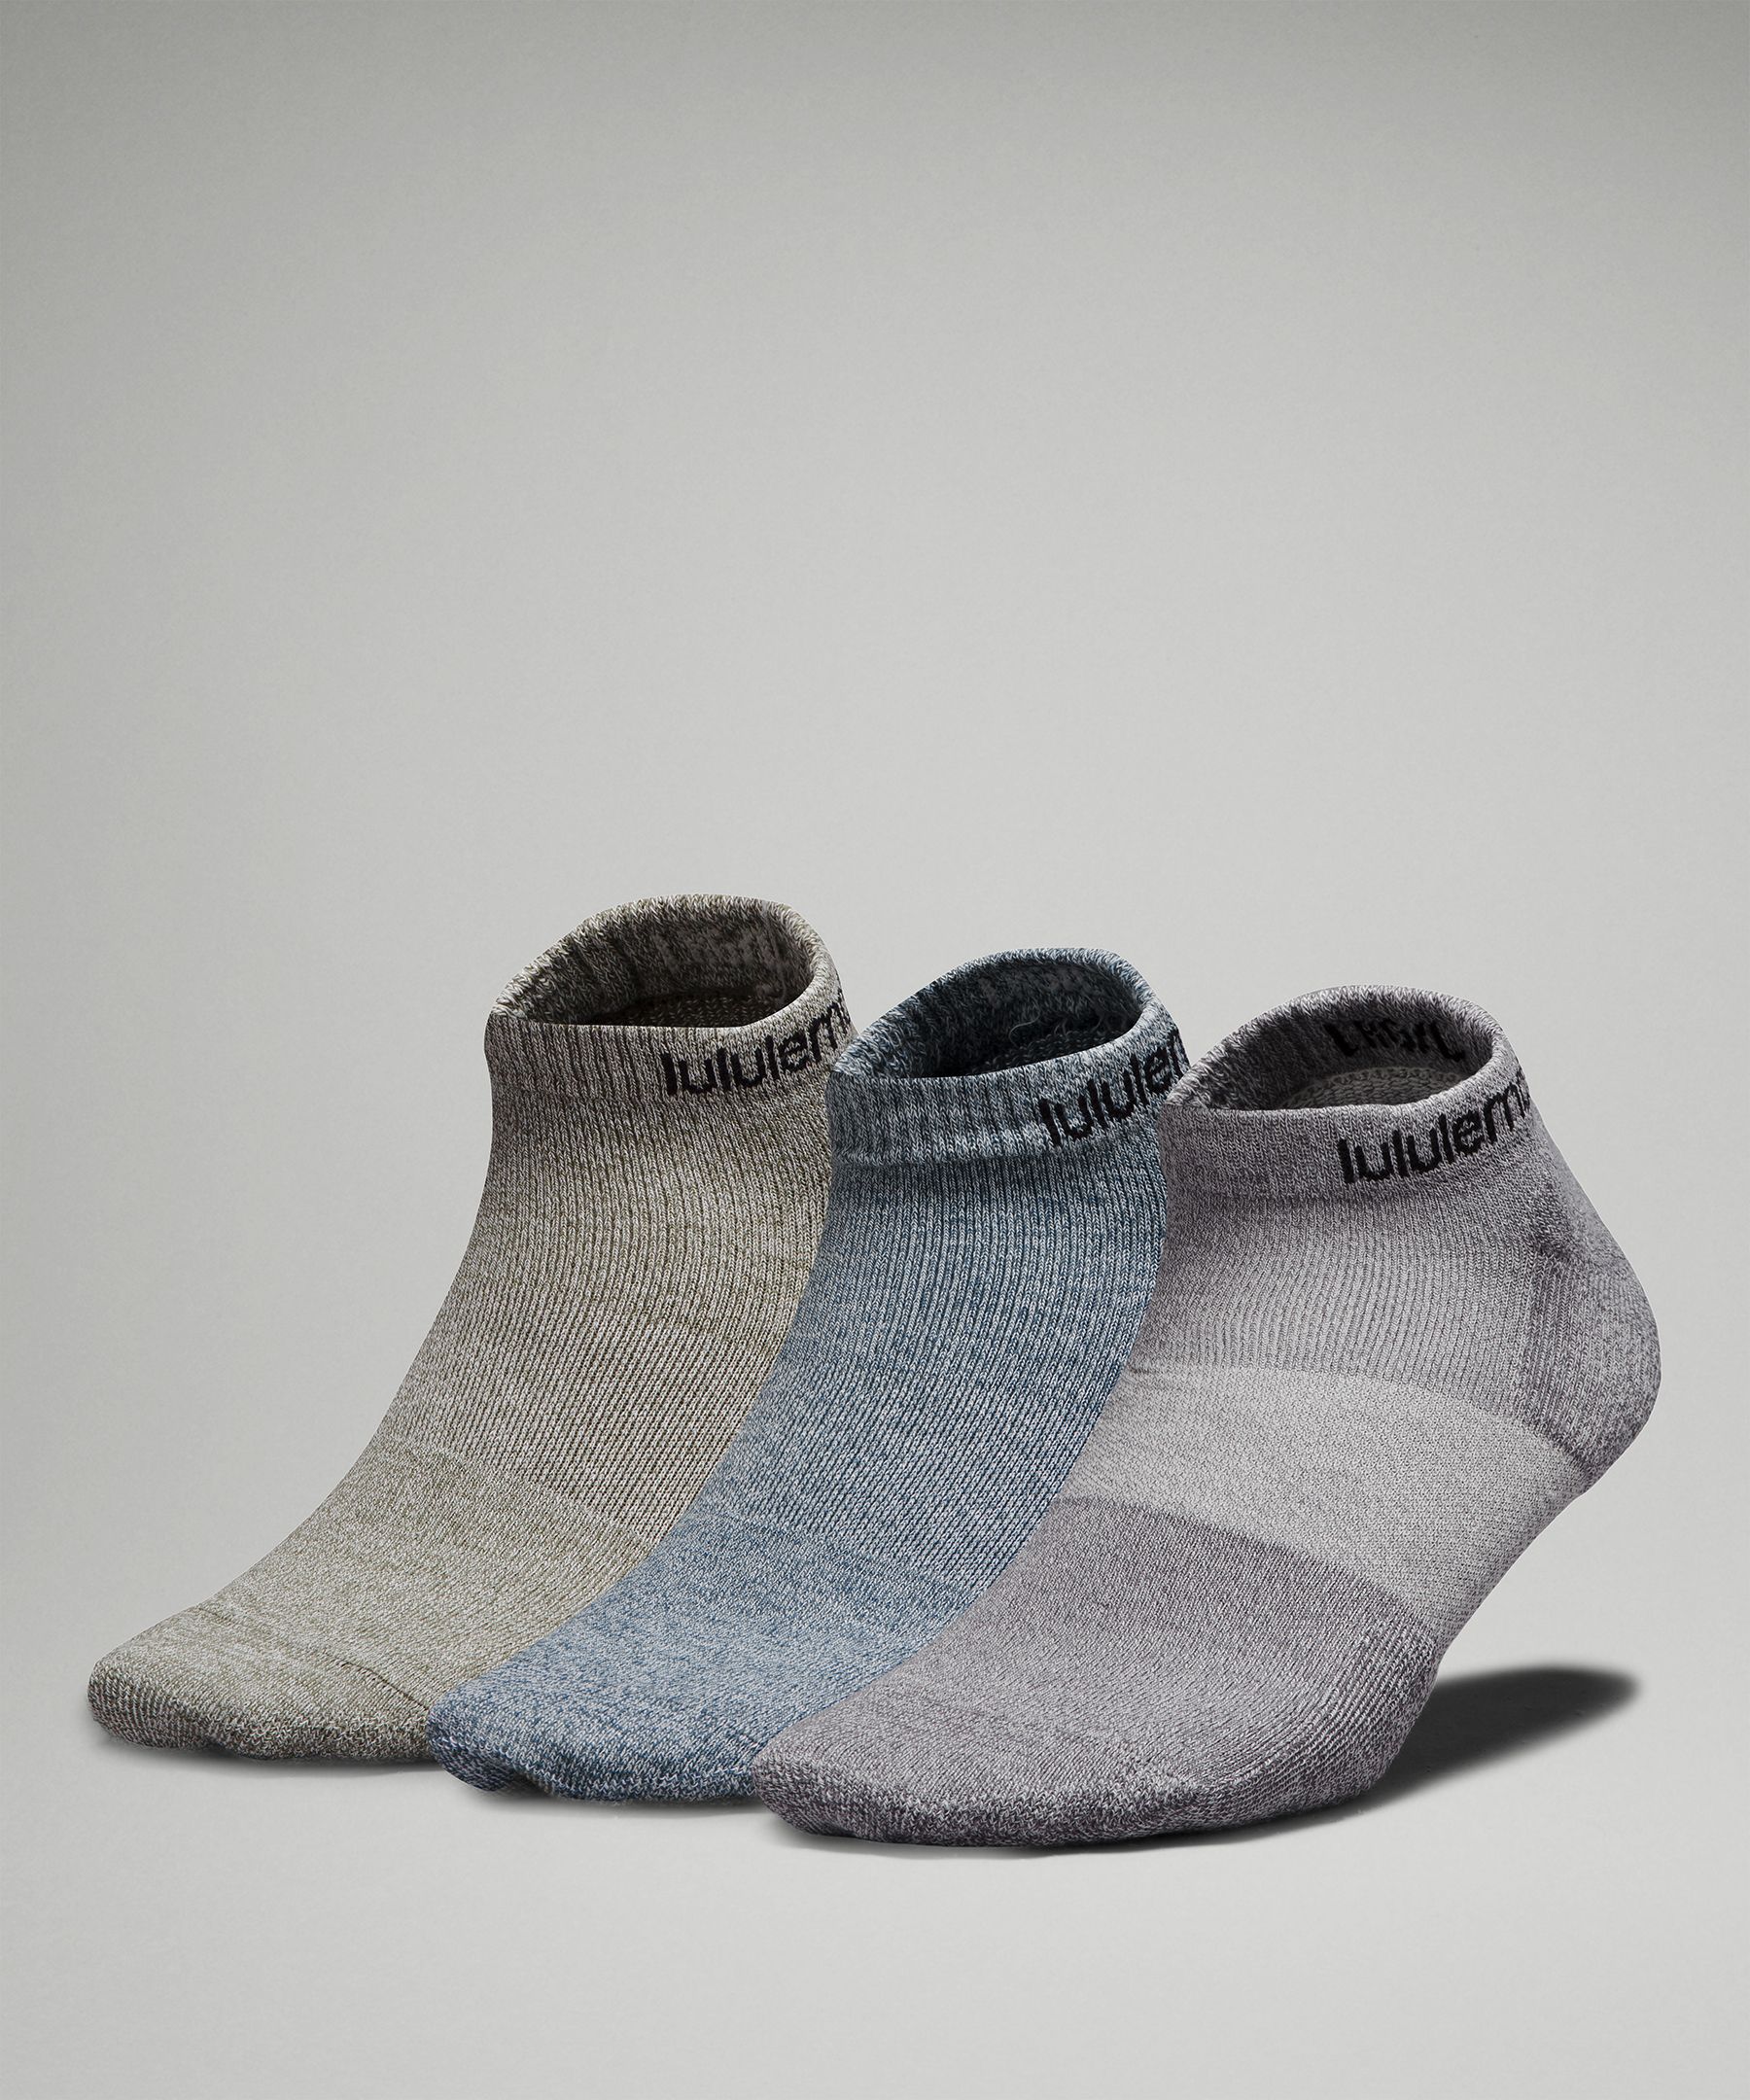 Mens Daily Stride Comfort Low-Ankle Socks *3 Pack